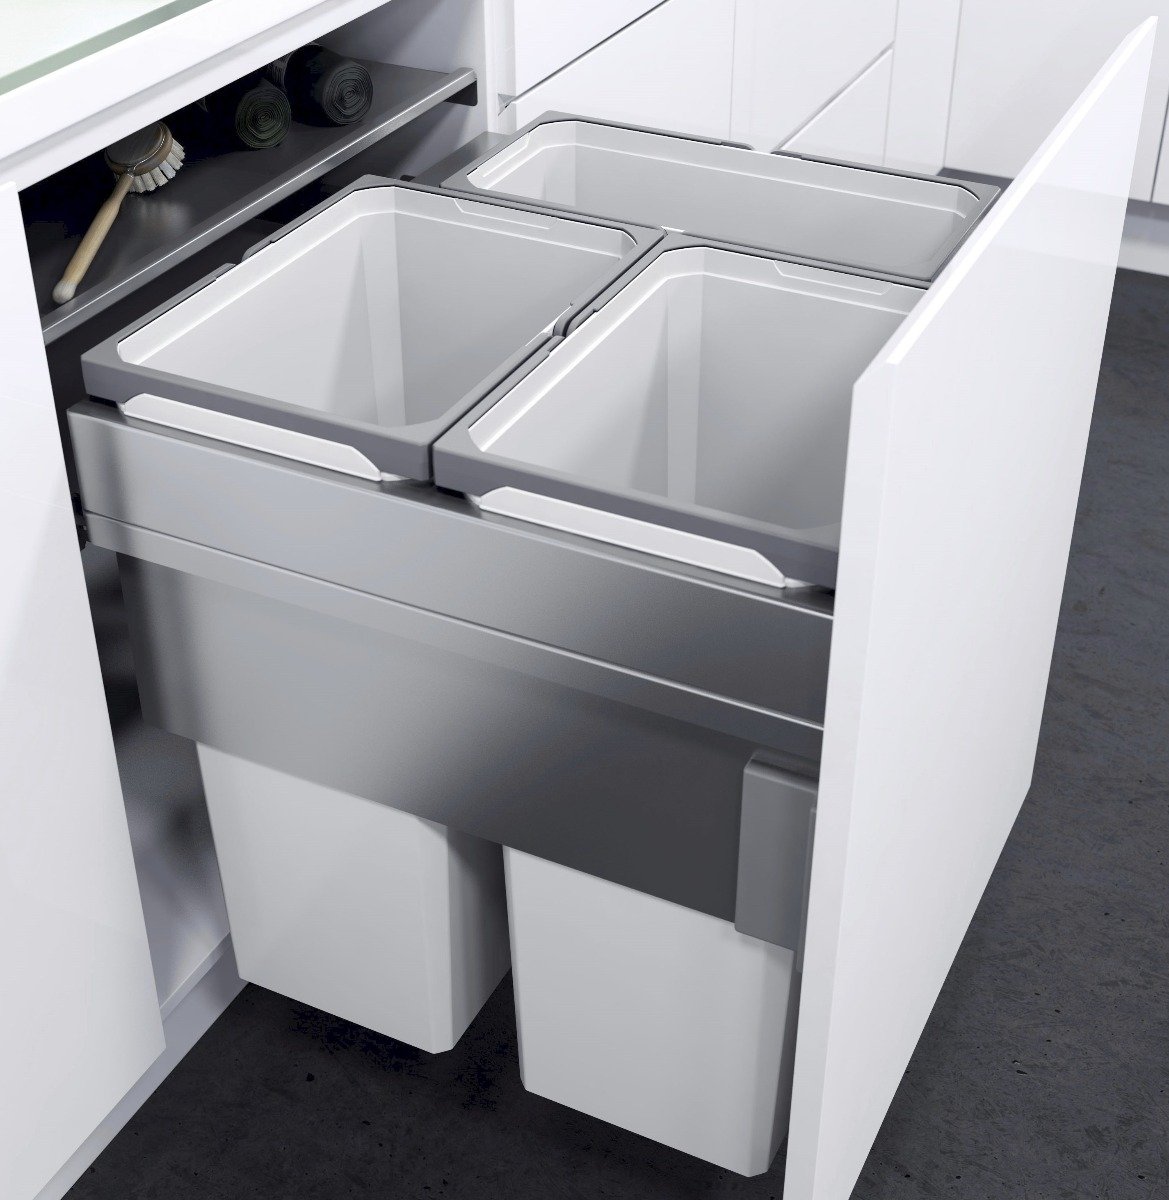 A silver grey Vauth-Sagel in-cupboard kitchen bin with three compartments for separating waste and recycling.